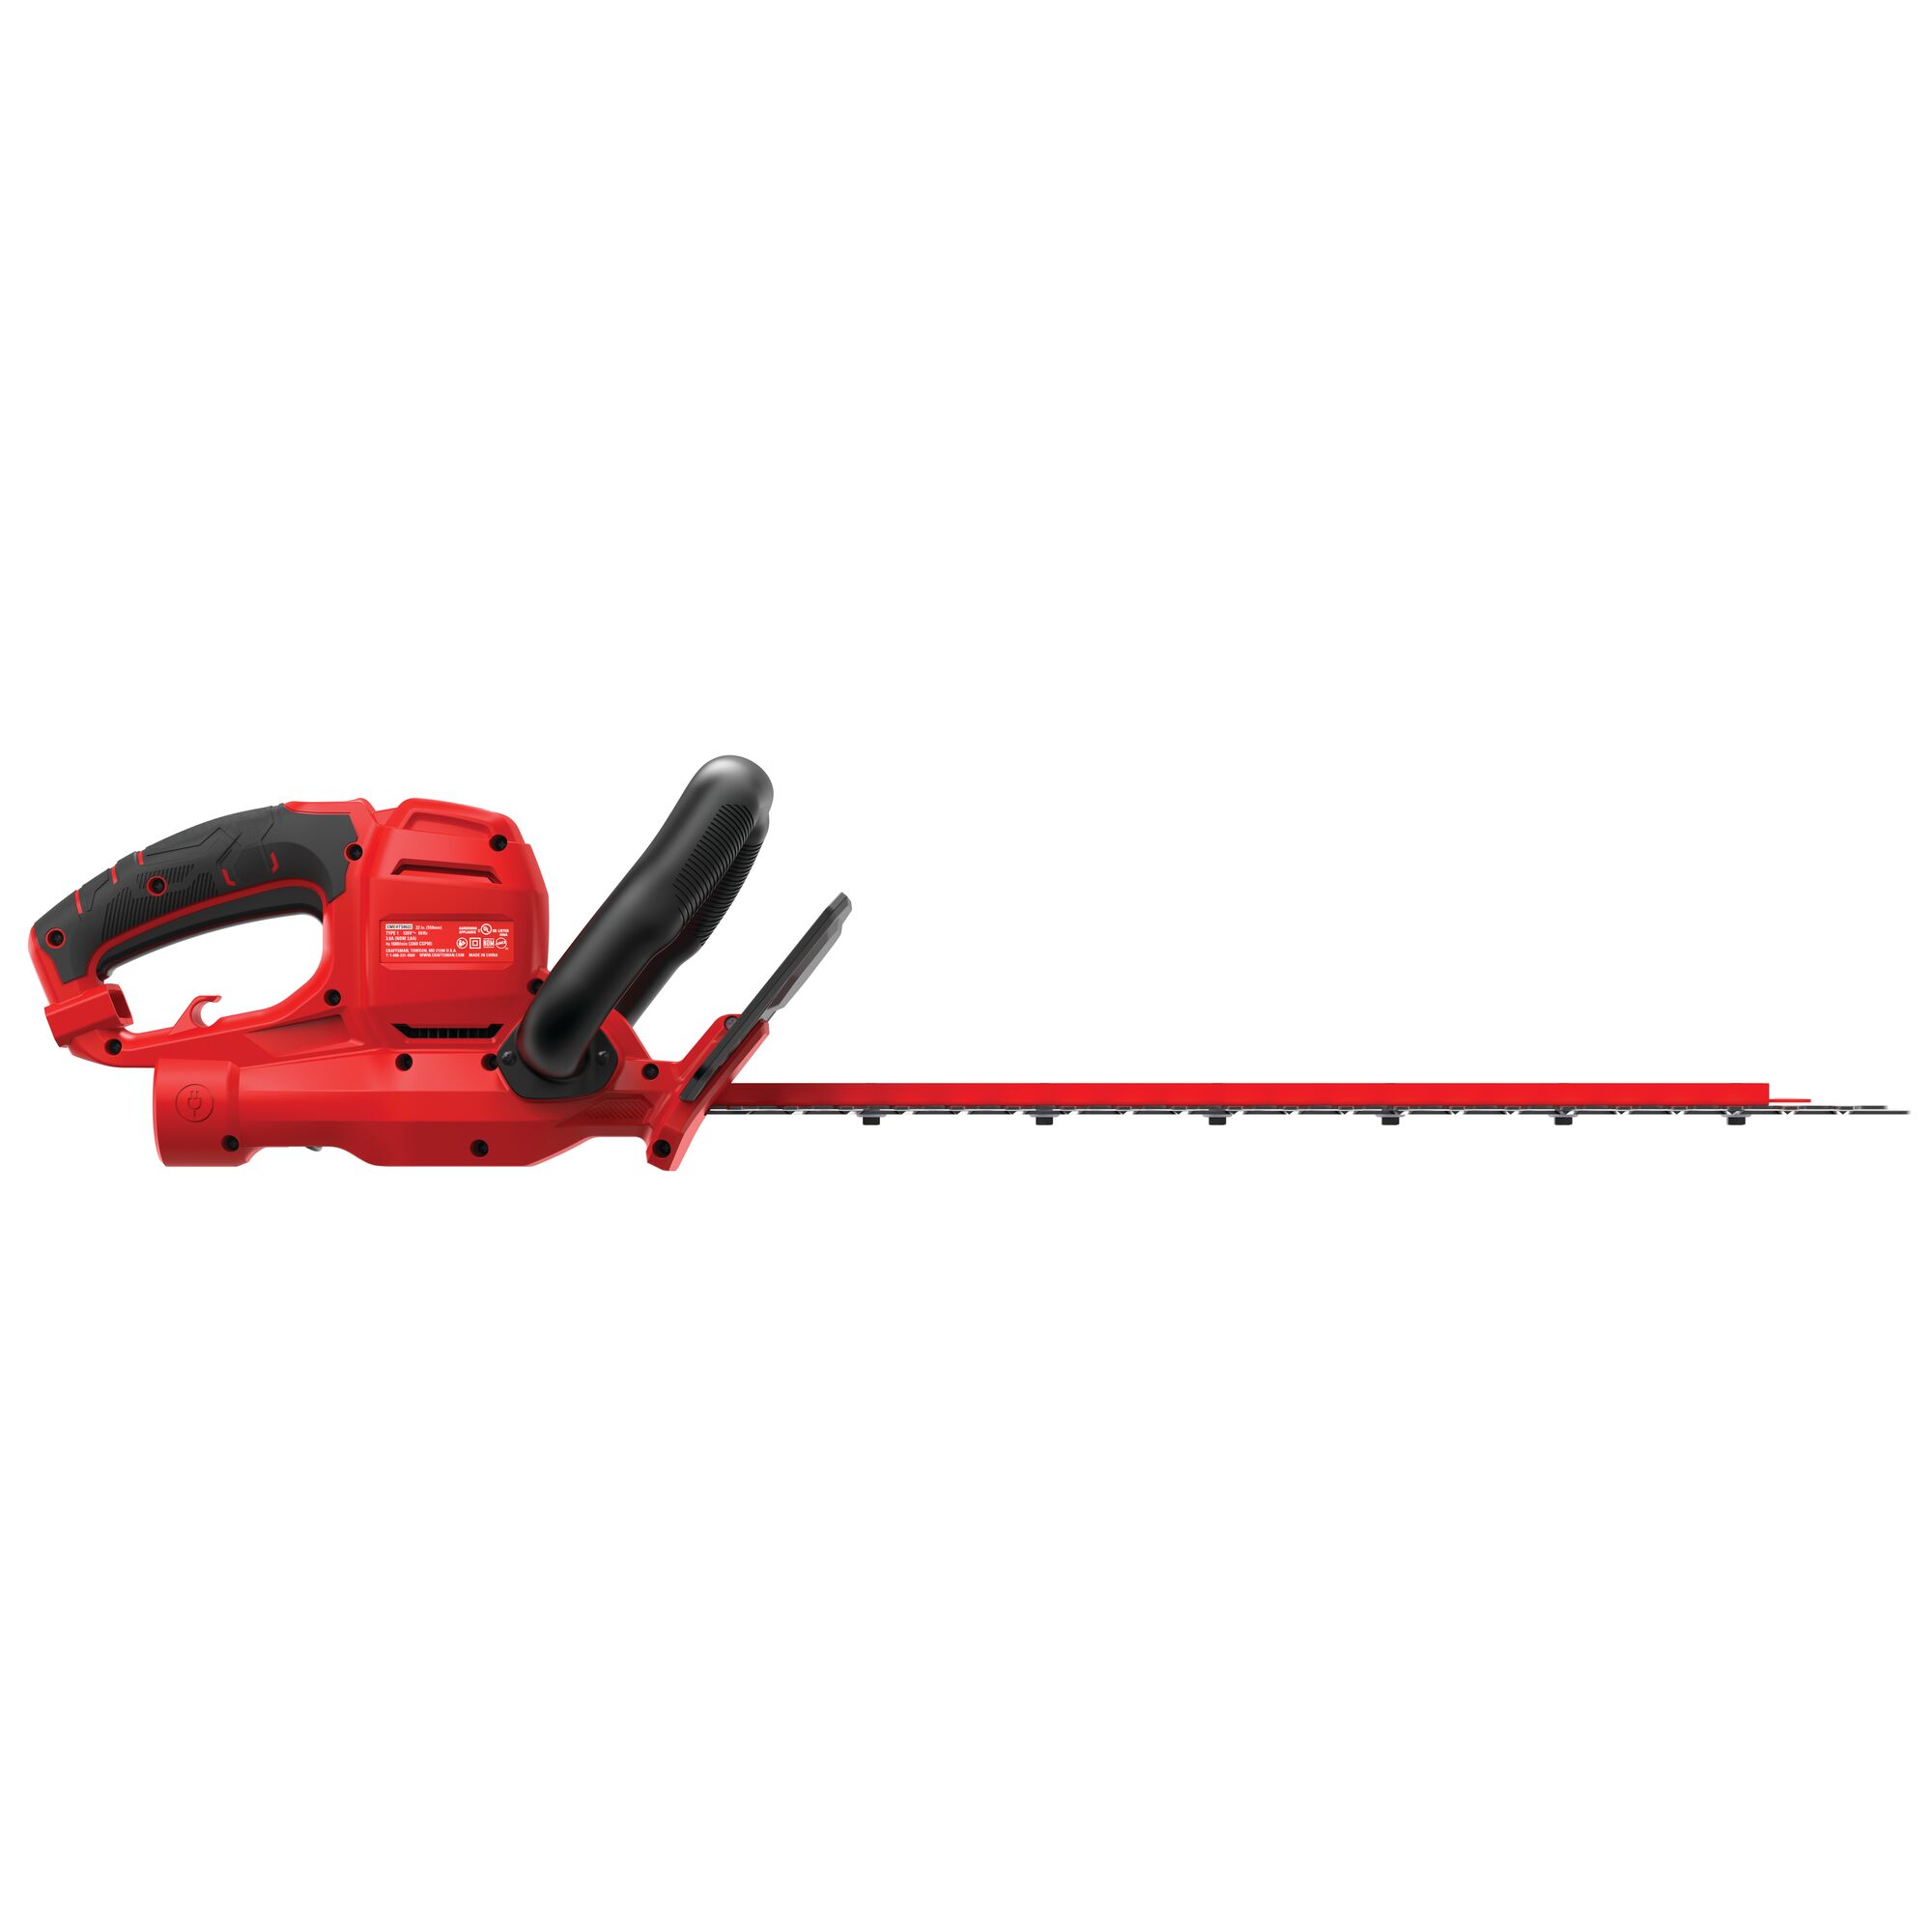 Left profile of 3 dot 8 amp 22 inches corded hedge trimmer.